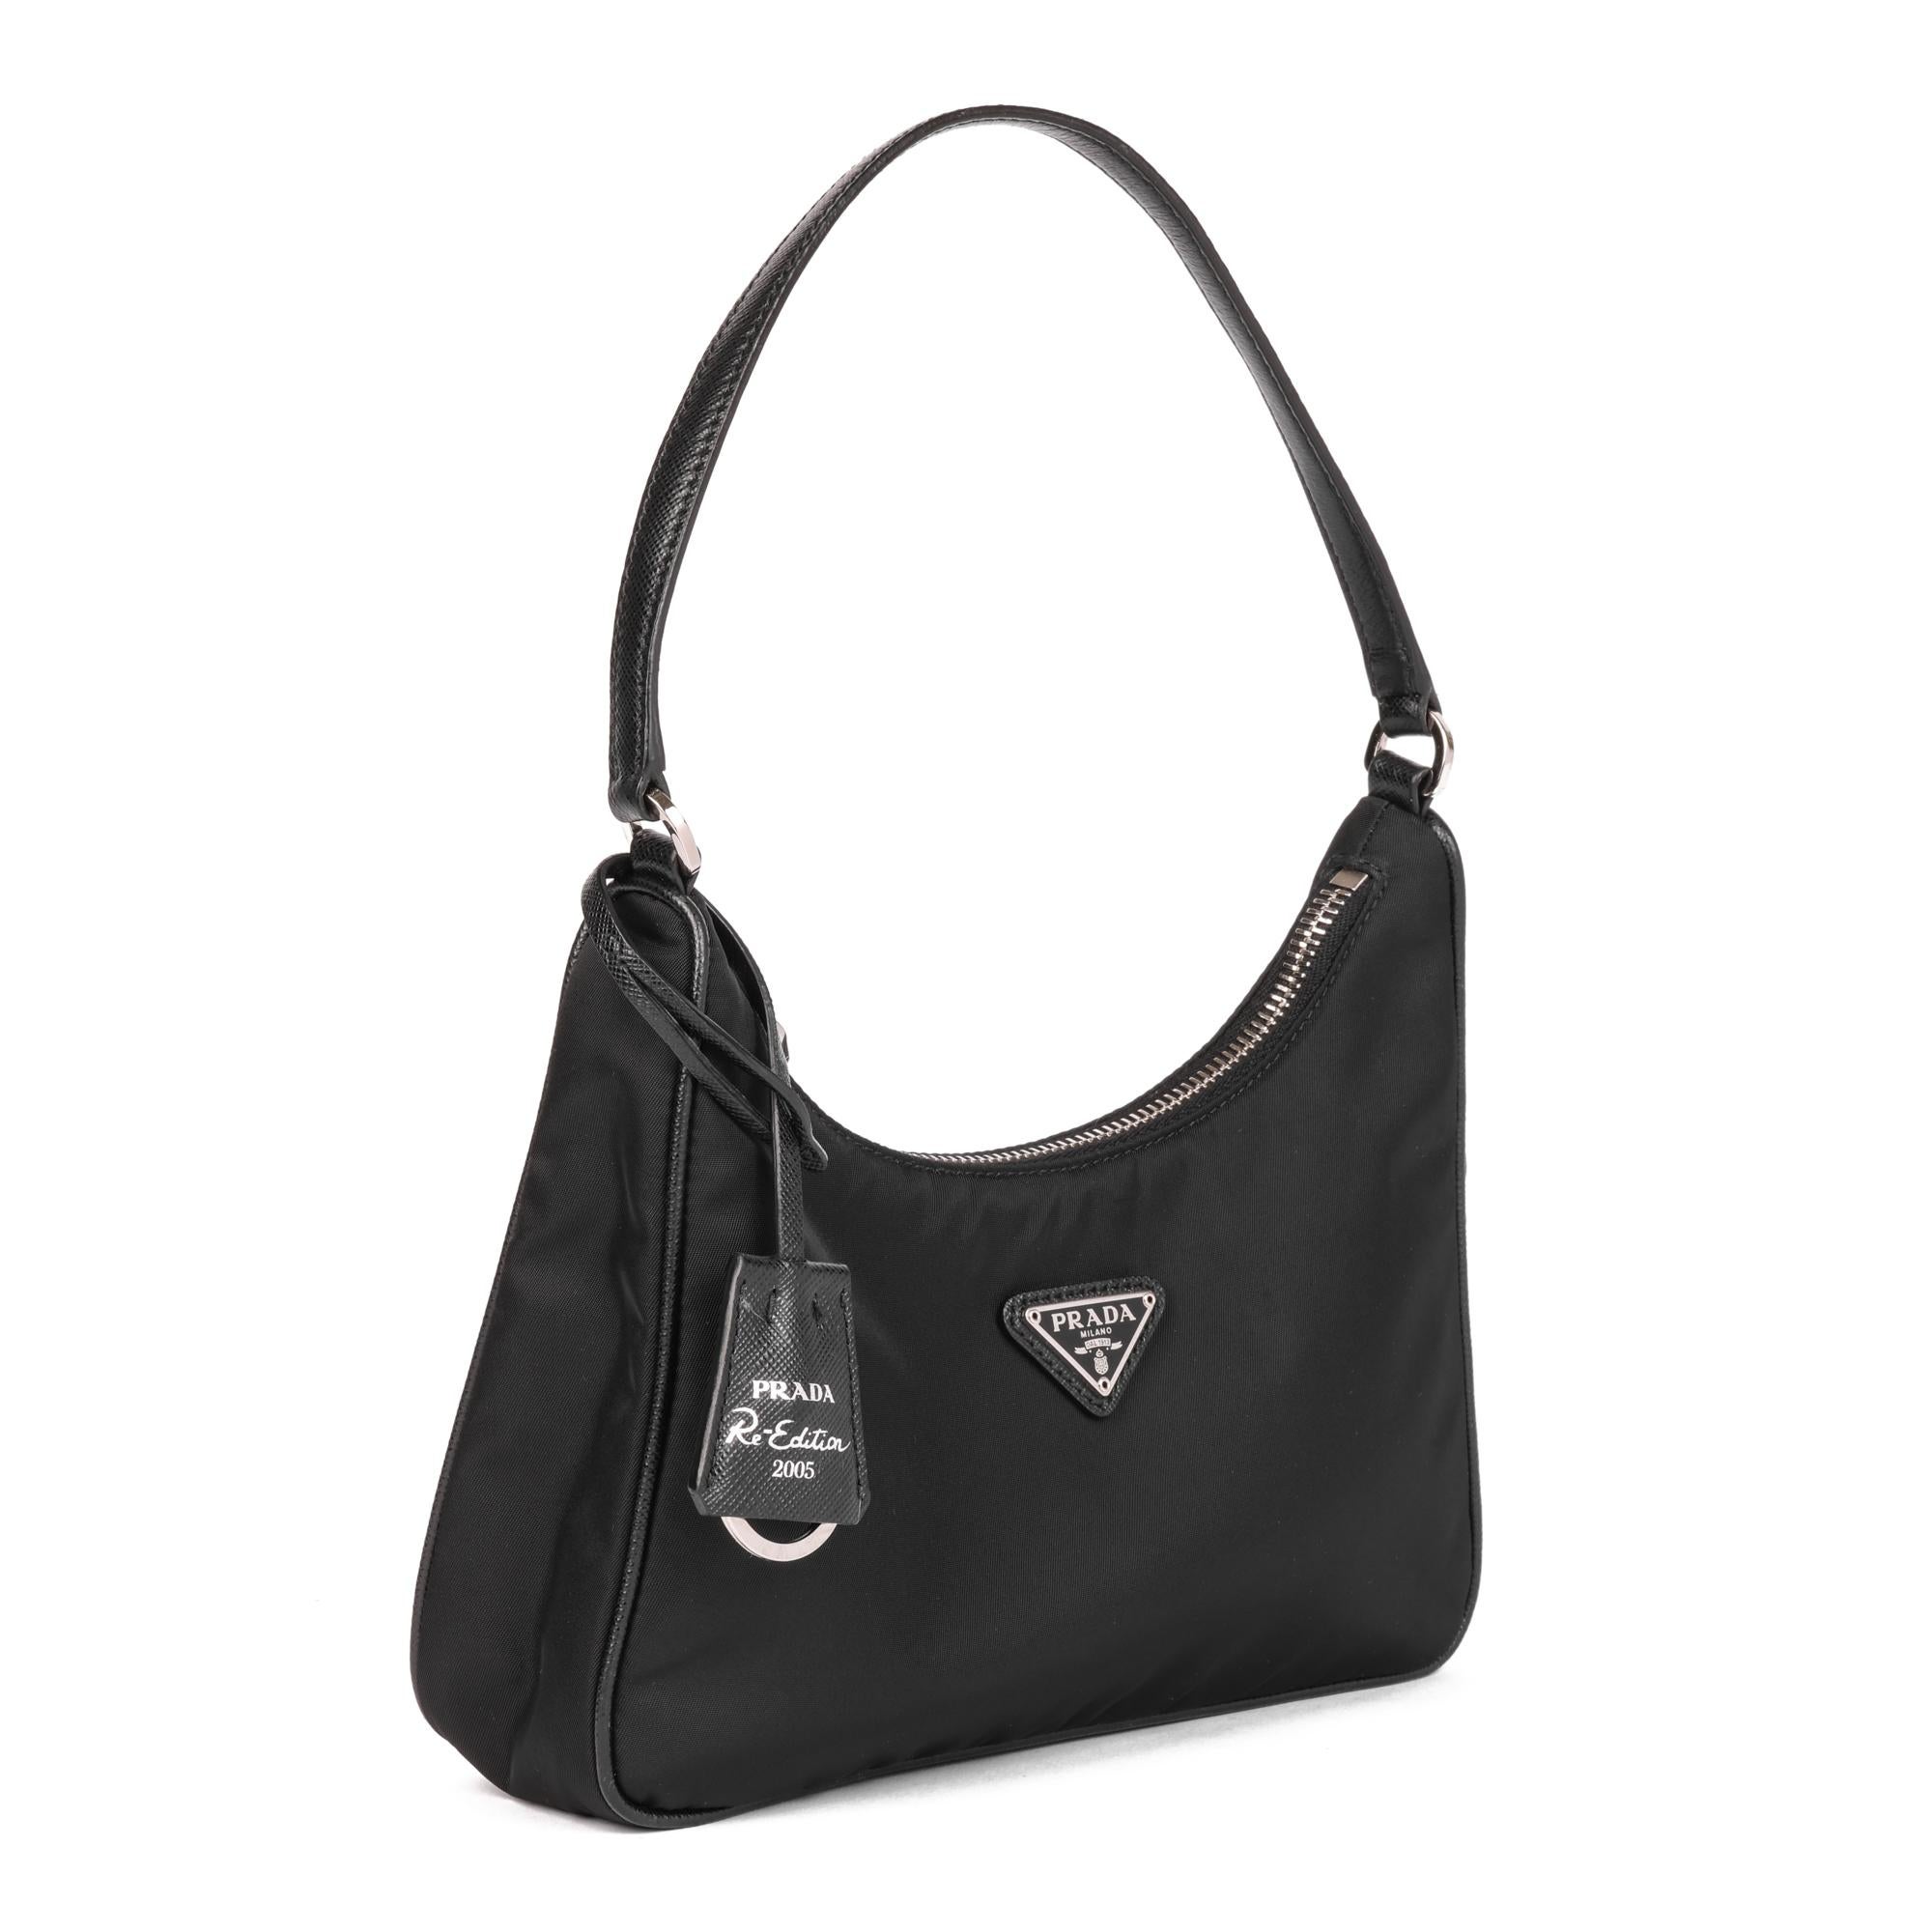 PRADA
Black Nylon Re-Edition 2005 Mini Bag

Xupes Reference: HB4905
Serial Number: 42
Age (Circa): 2020
Accompanied By: Clochette
Authenticity Details: Serial Tag (Made in Italy) 
Gender: Ladies
Type: Top Handle

Colour: Black
Hardware: